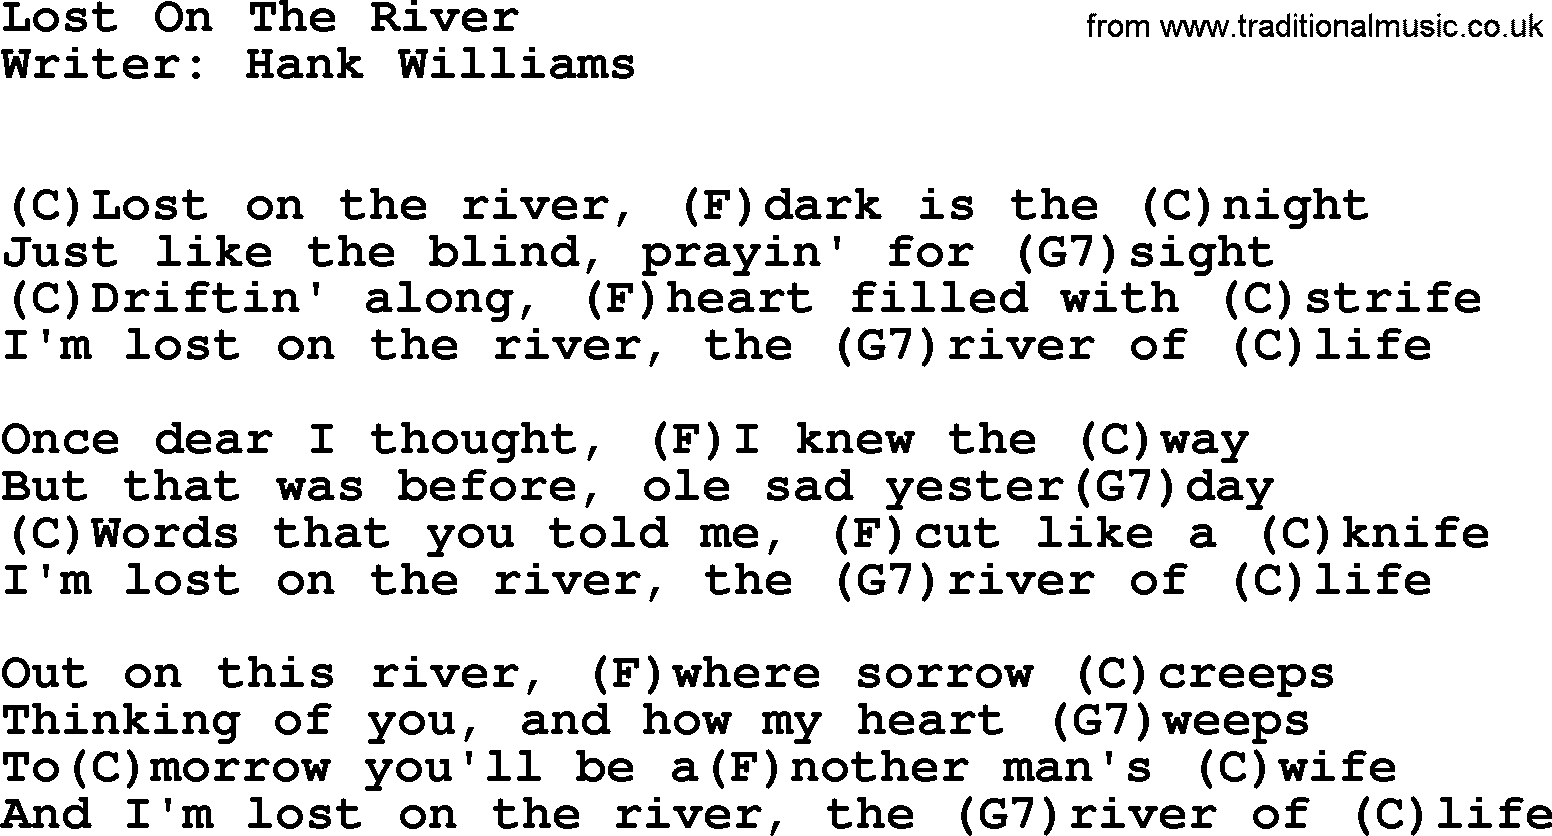 Hank Williams song Lost On The River, lyrics and chords